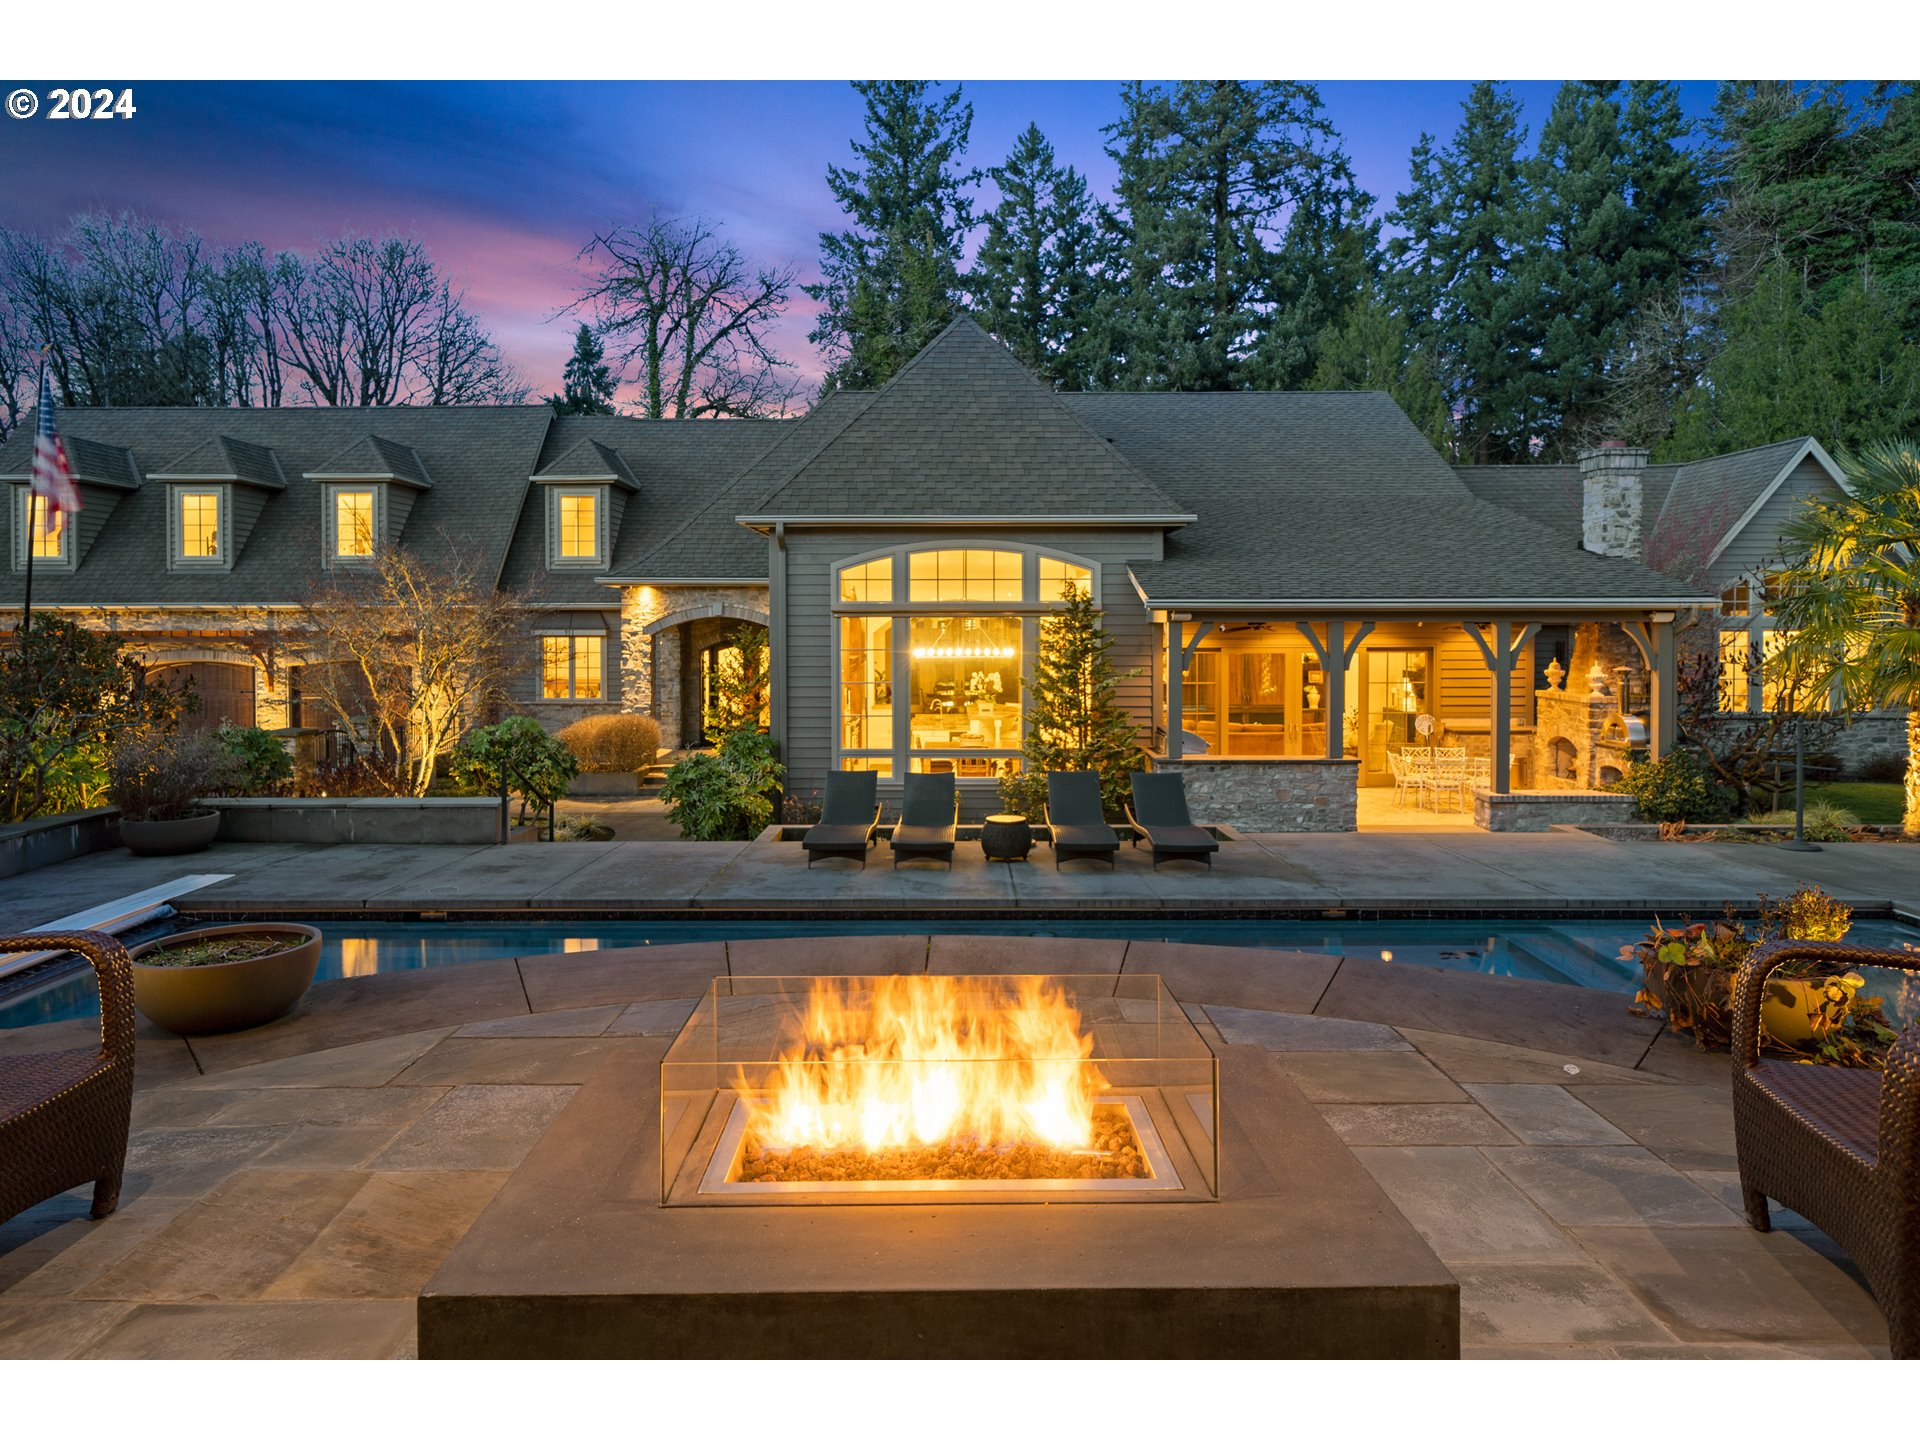 Presenting an unparalleled oasis in the heart of Lake Oswego, originally designed by the Olson Group Architects and brought to life by the craftsmanship of Stoneridge Custom Development. This exclusive 1.88-acre estate, ensconced within a secure gated enclave, offers a lifestyle of extraordinary luxury and privacy. At its heart lies an awe-inspiring pool, accompanied by a spacious vaulted pool house that defines the epitome of upscale entertainment - complete with a DJ stage, a sophisticated kitchenette/bar, and a versatile home office/studio, and oversized two-car garage with lift. The residence itself is a testament to elegant comfort, boasting a thoughtful layout designed for both grand entertaining and intimate day-to-day living. The main floor is anchored by the vaulted primary suite, offering privacy and separation from the rest of the home and featuring a spacious closet with custom built-ins and laundry. The second floor unveils a unique split design, featuring a spacious guest suite with laundry and spacious storage/bonus room that is opposite to the other wing, which is home to four additional bedrooms and home gym. Perfect family home with a stunning library retreat and basement home theater. Every detail is accentuated by soaring ceilings with robust wooden beams and expansive windows, bathing each generously proportioned room in natural light and privacy. Additional features include an oversized attached three-car attached garage and a dedicated RV pad, solar pool heating, and newly expanded backyard. Situated on the edge of a 6.8-acre nature park with five miles of trails in the esteemed Forest Highlands neighborhood, you enjoy close proximity to both downtown Lake Oswego and Lake Oswego High School. Unincorporated Clackamas County.